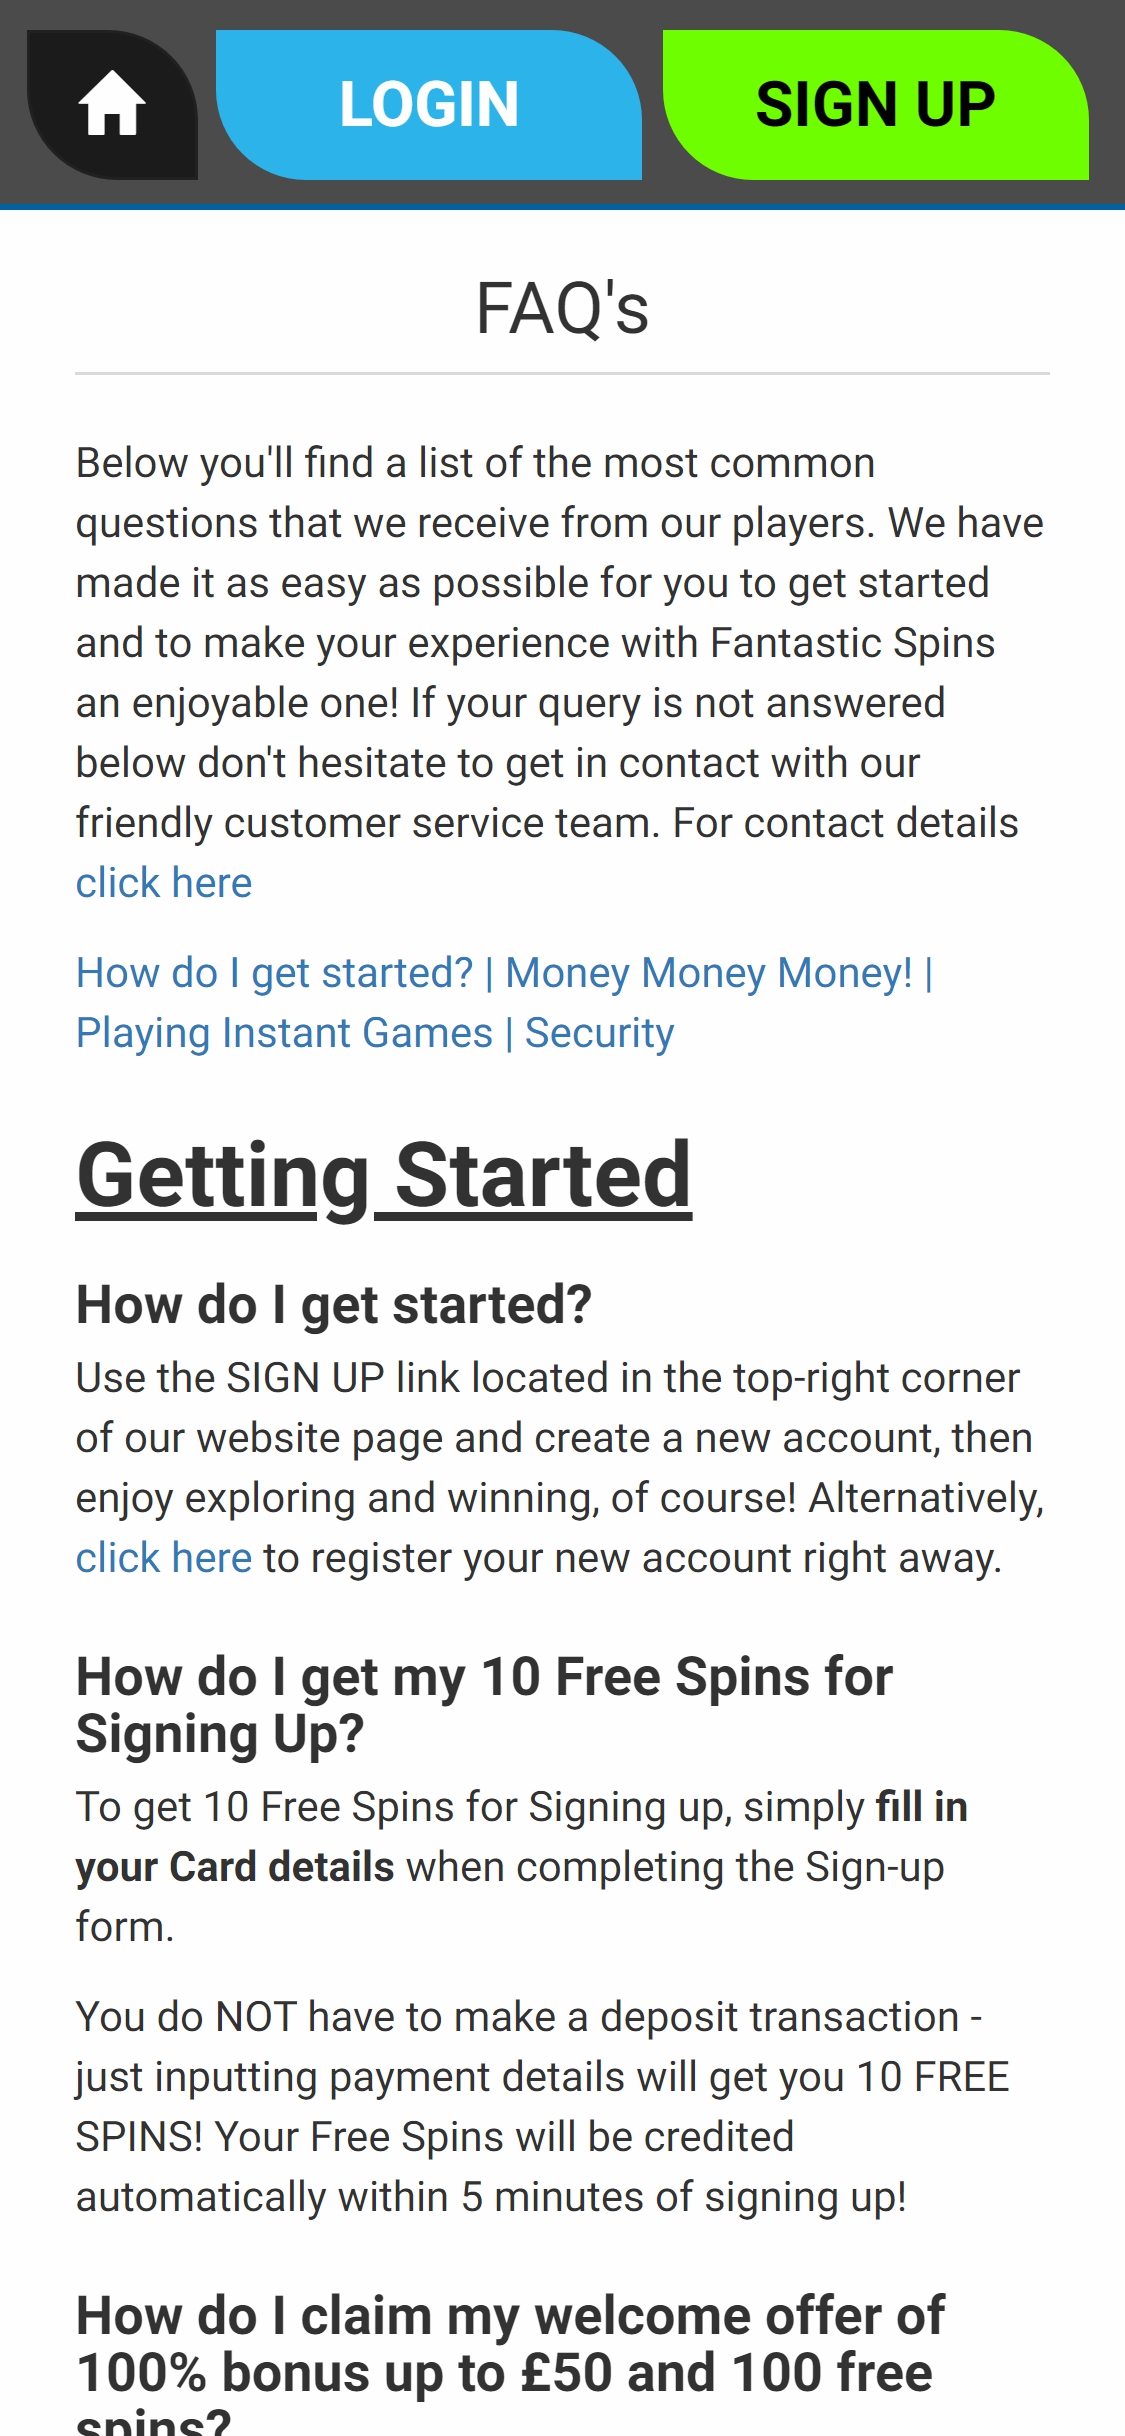 Fantastic Spins Casino Mobile Support Review